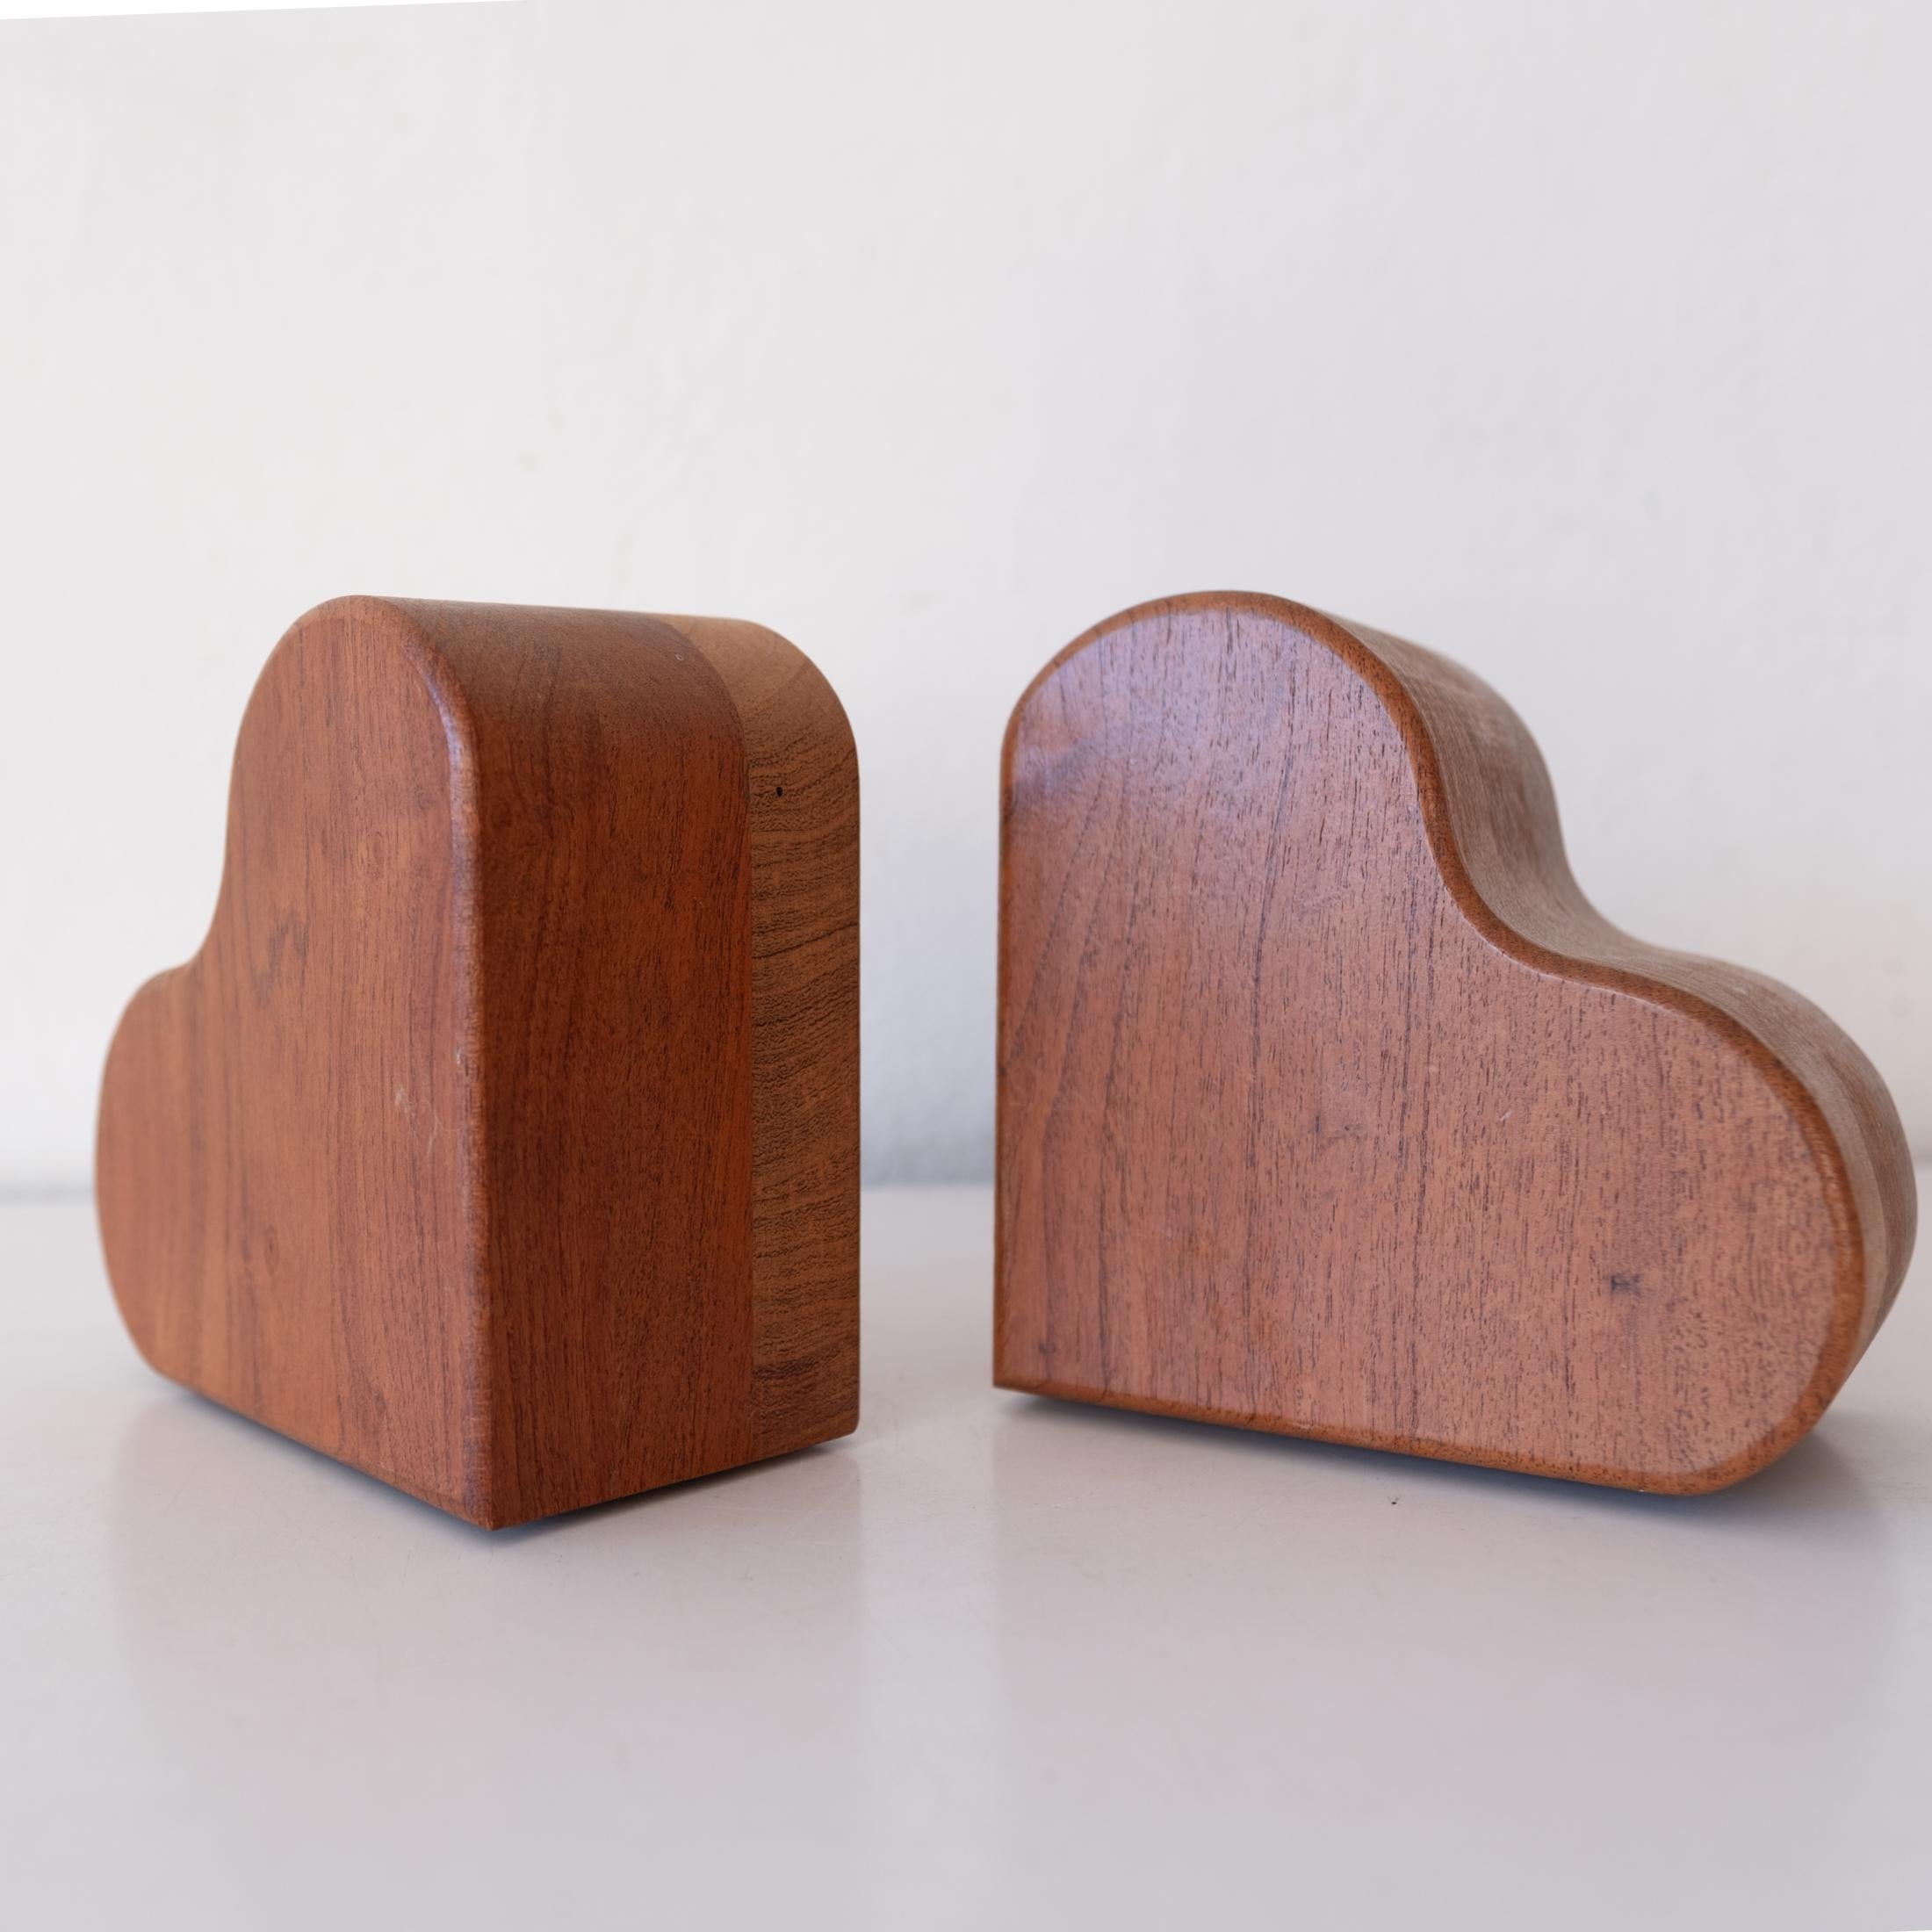 Studio Crafted Wood Heart Bookends  In Good Condition For Sale In San Diego, CA